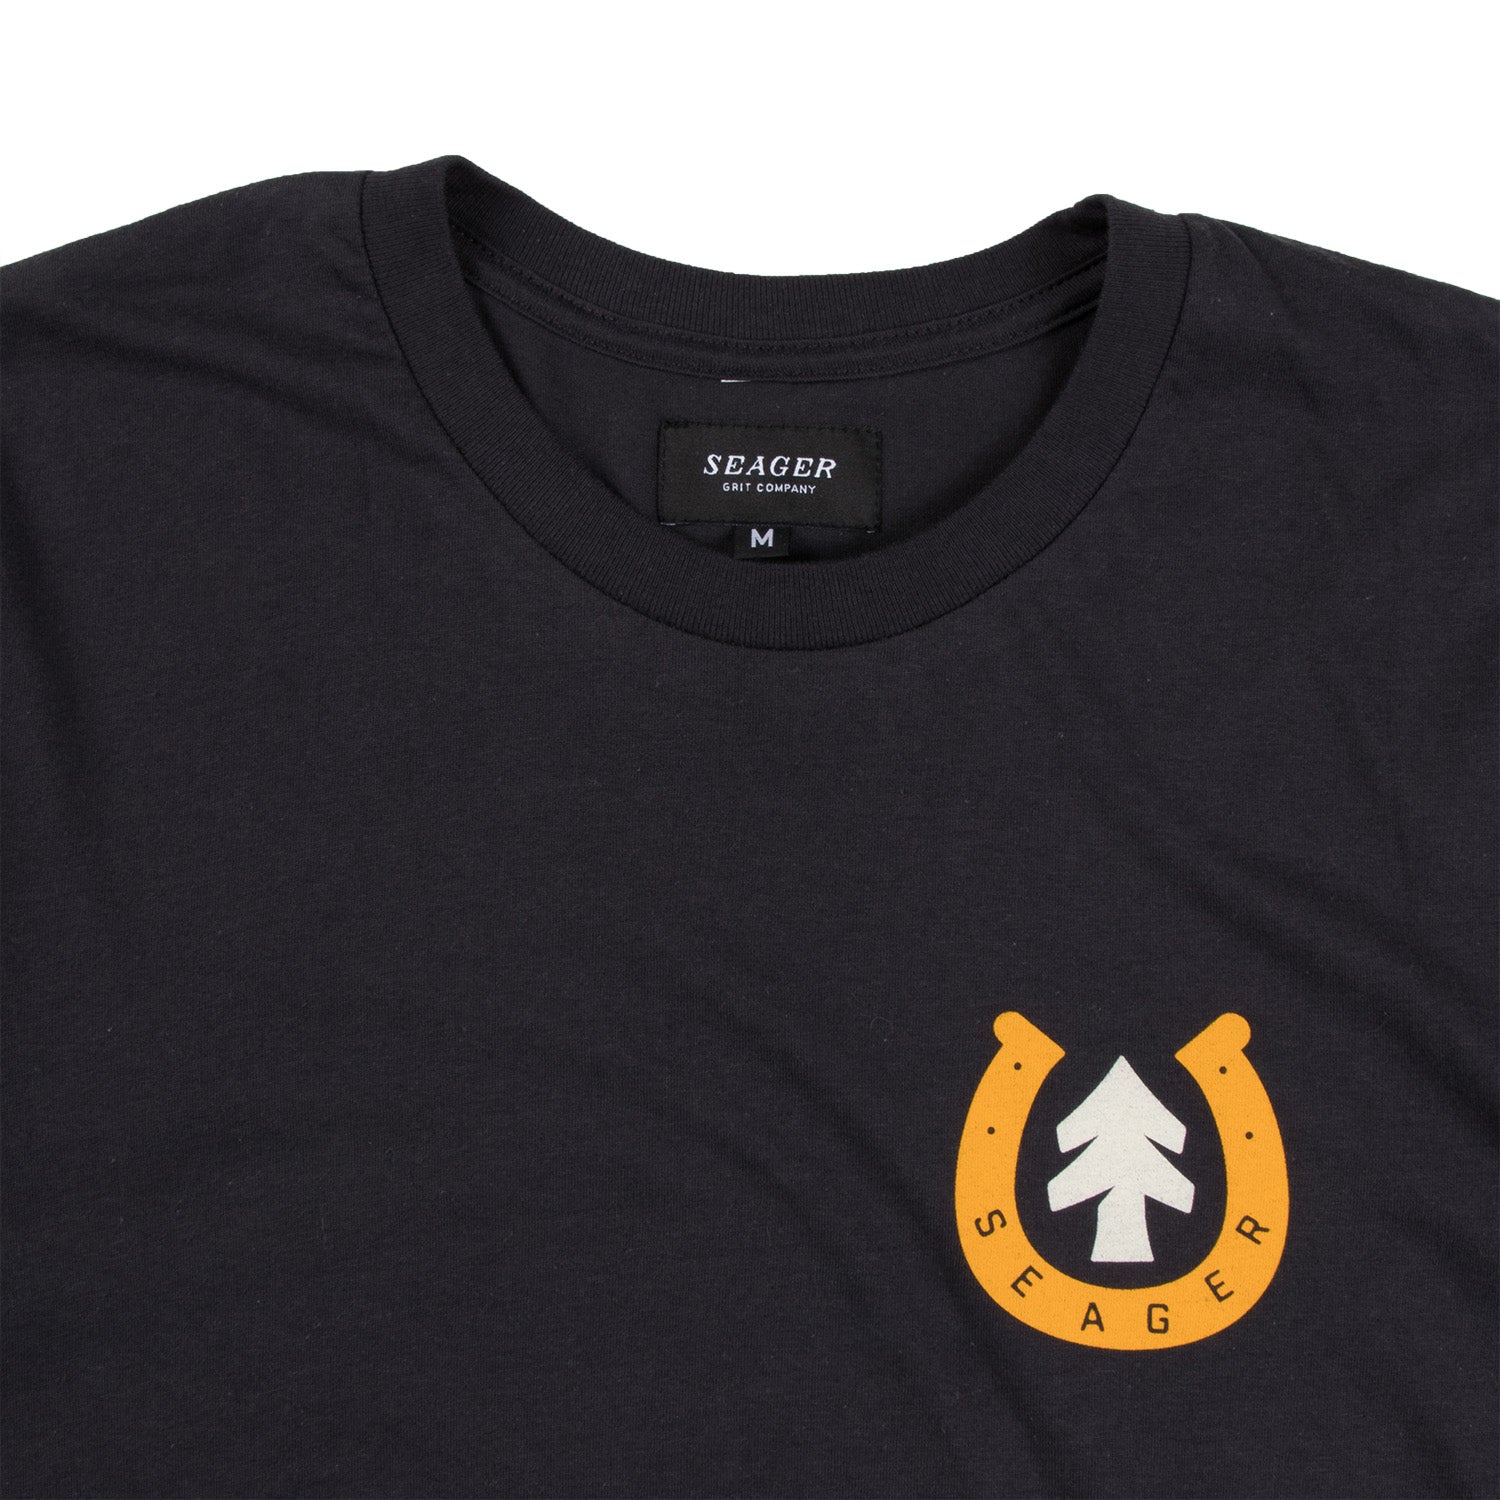 Seager x Huckberry Map Tee Charcoal